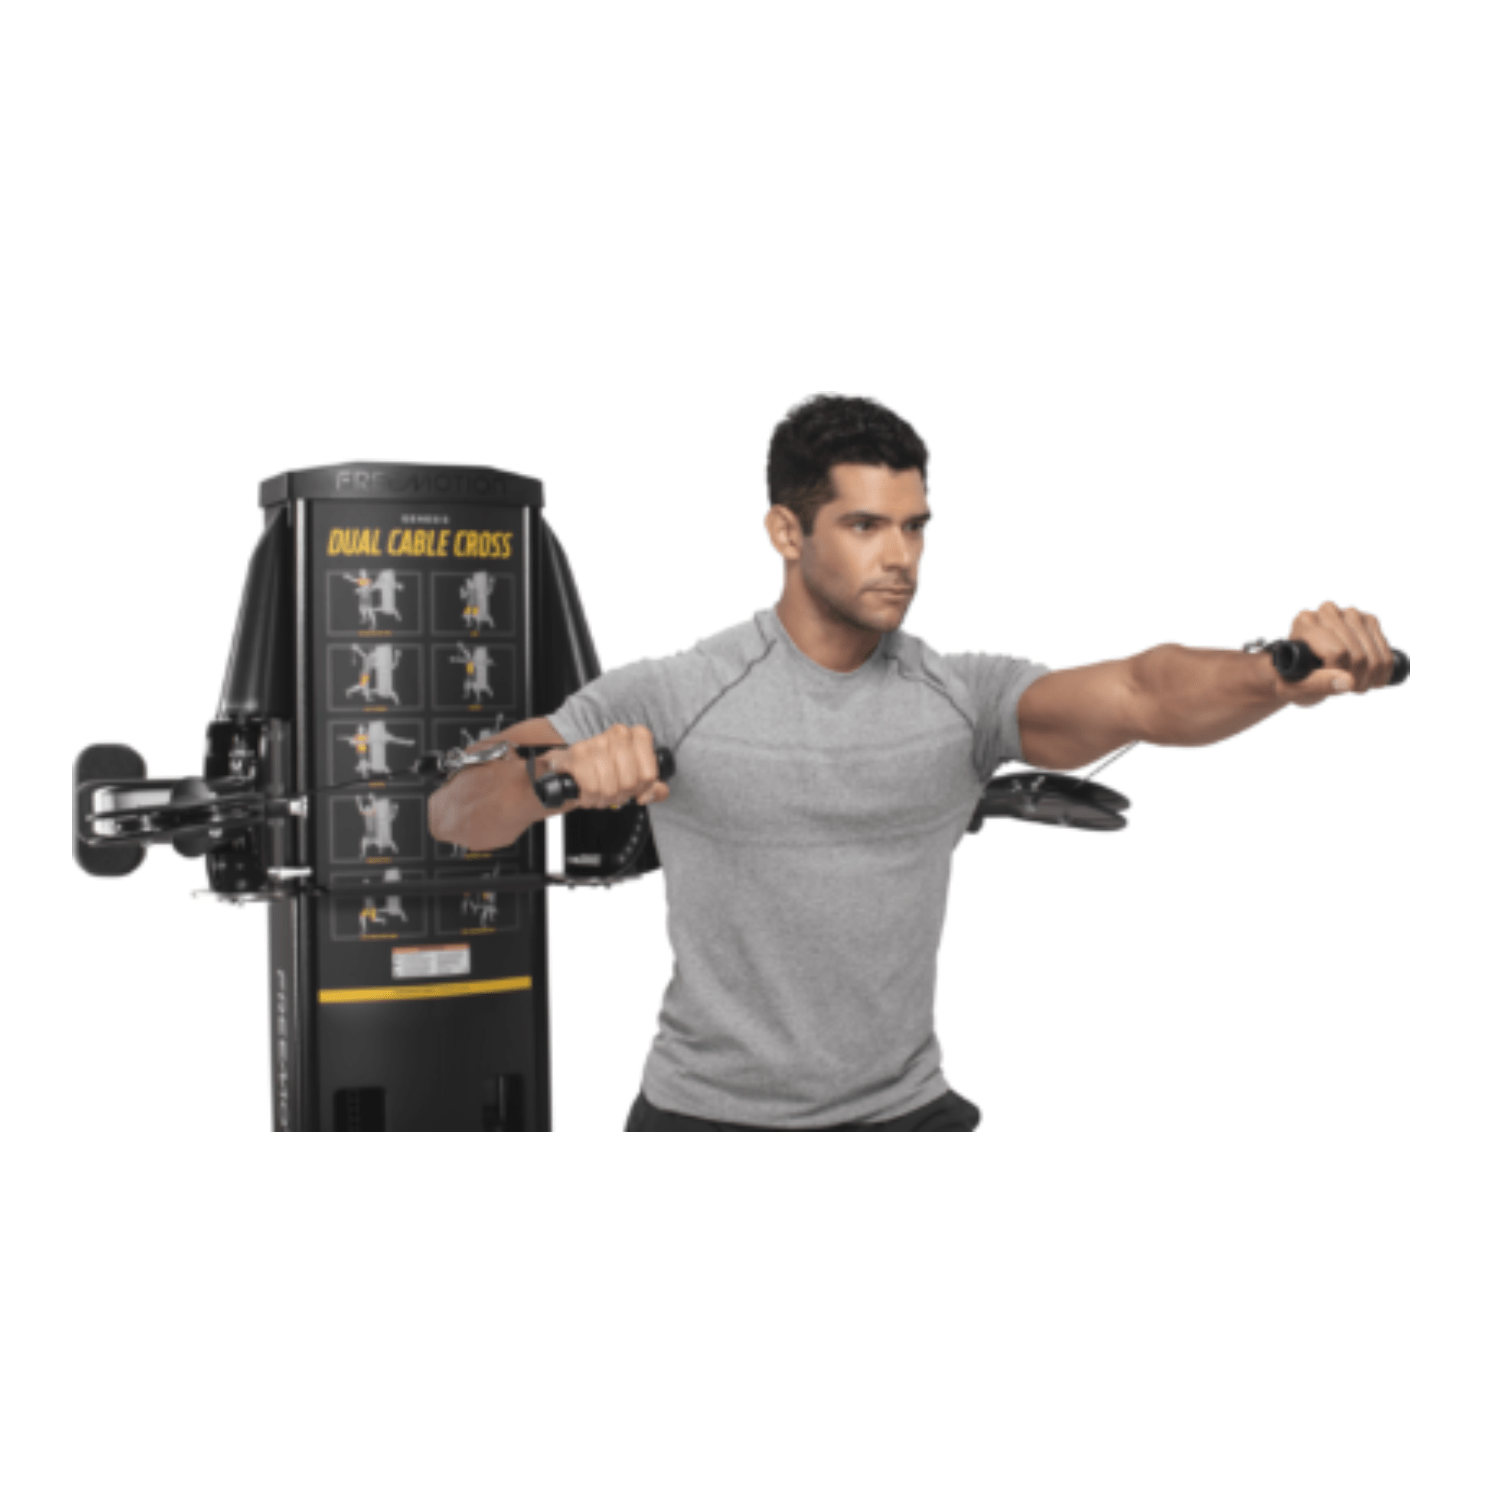 FreeMotion G624 Dual Cable Cross - Functional Trainer - FreeMotion - 9